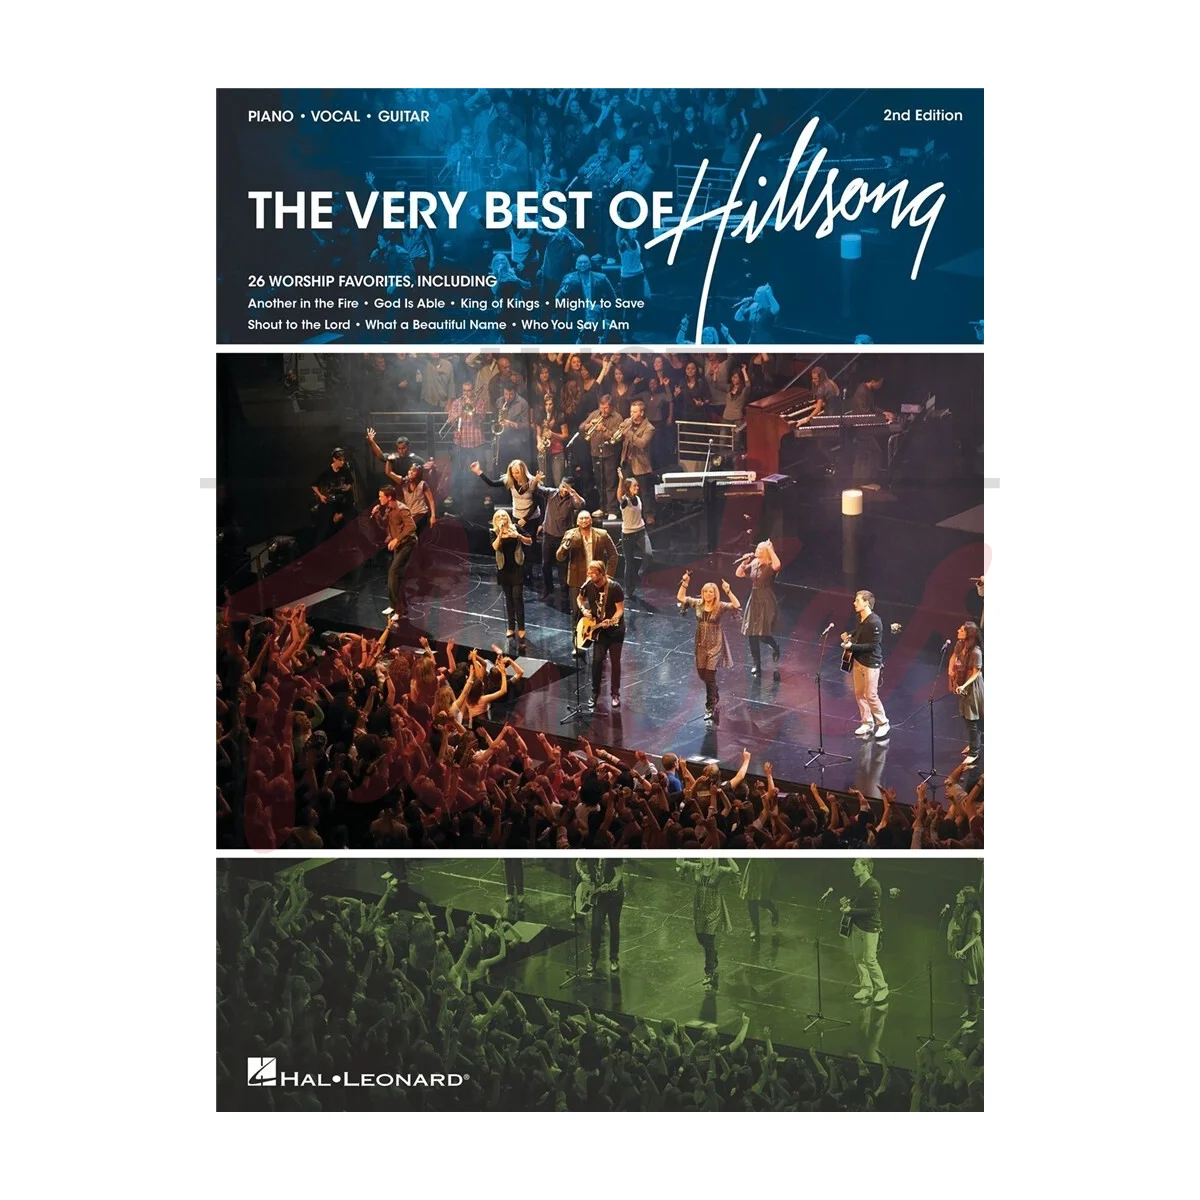 The Very Best of Hillsong for Piano, Vocal and Guitar